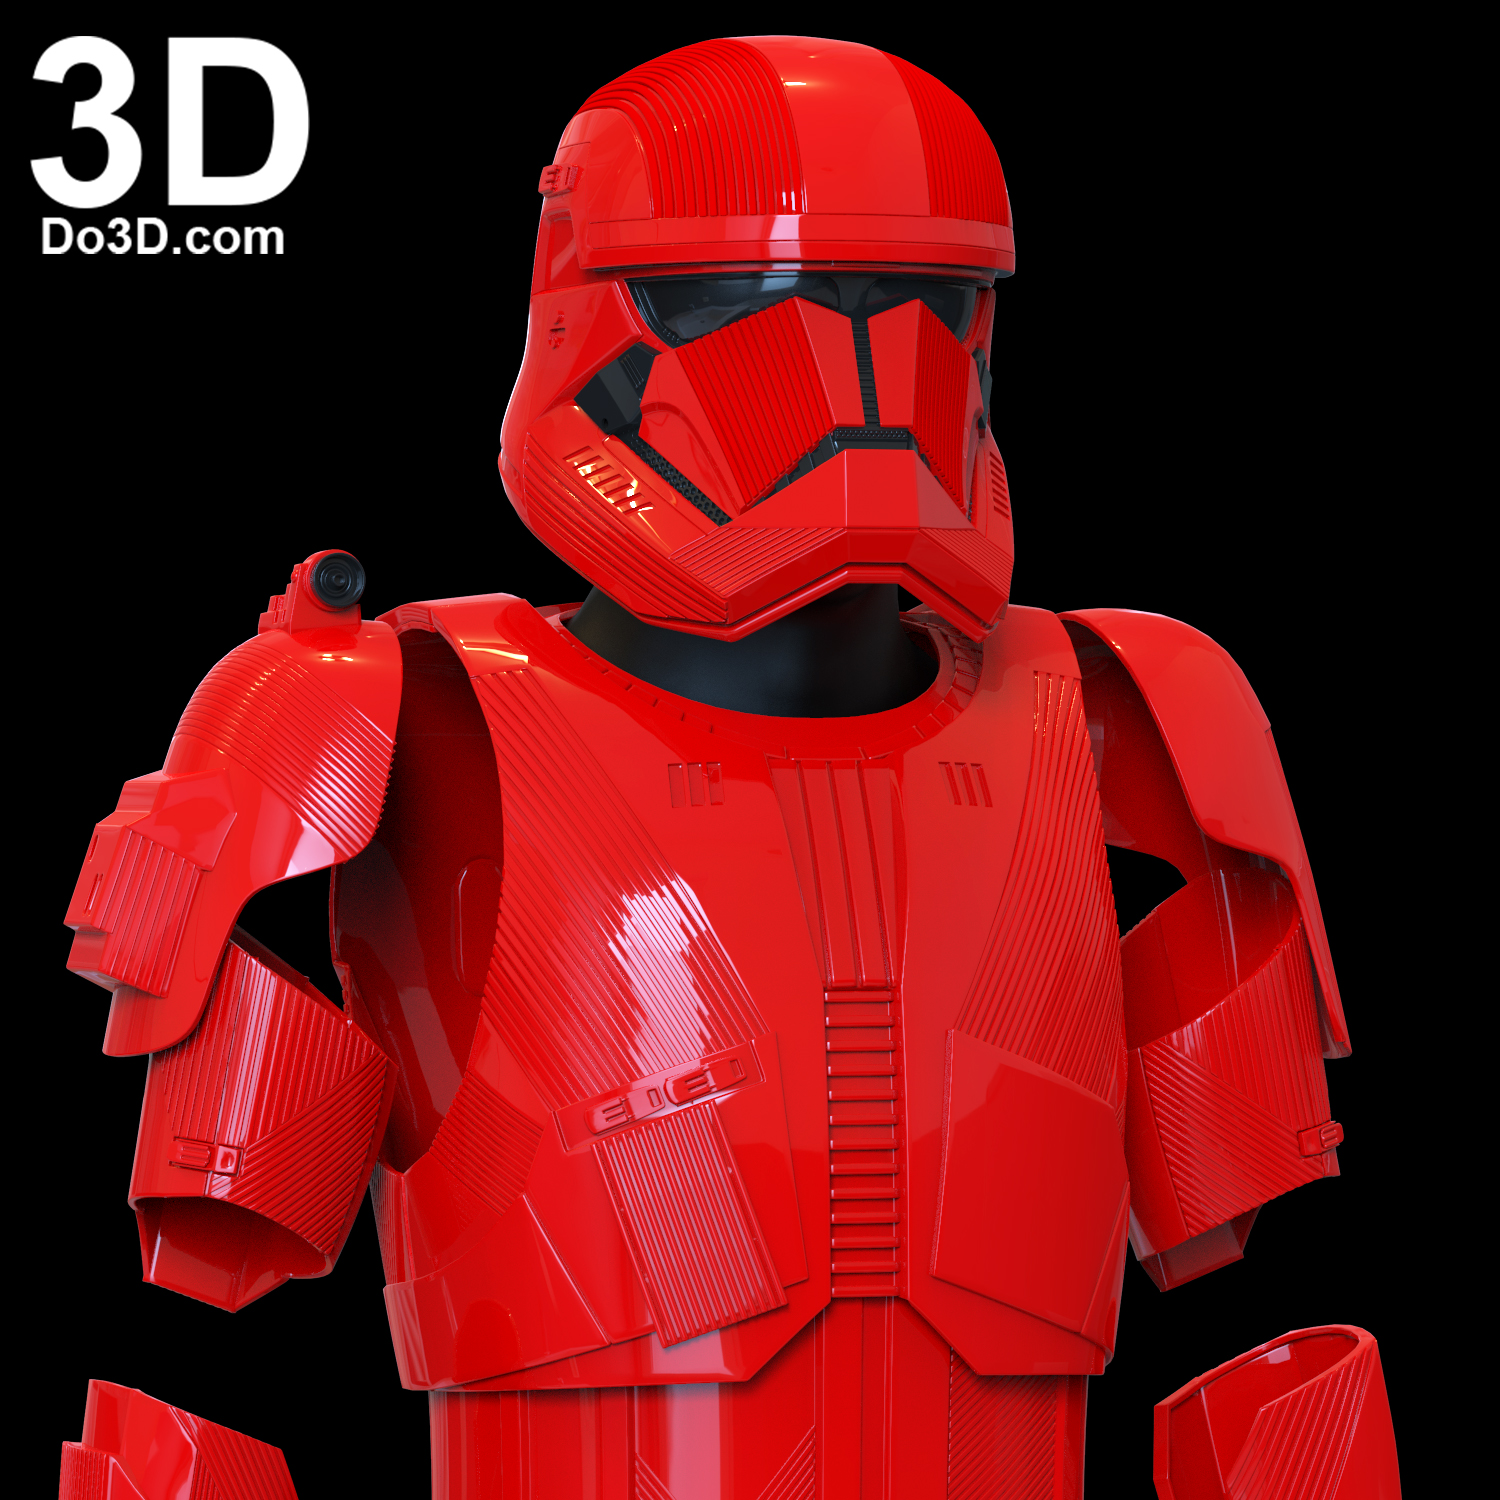 3D Printable Model Sith Trooper Full Armor Suit from Star Wars The